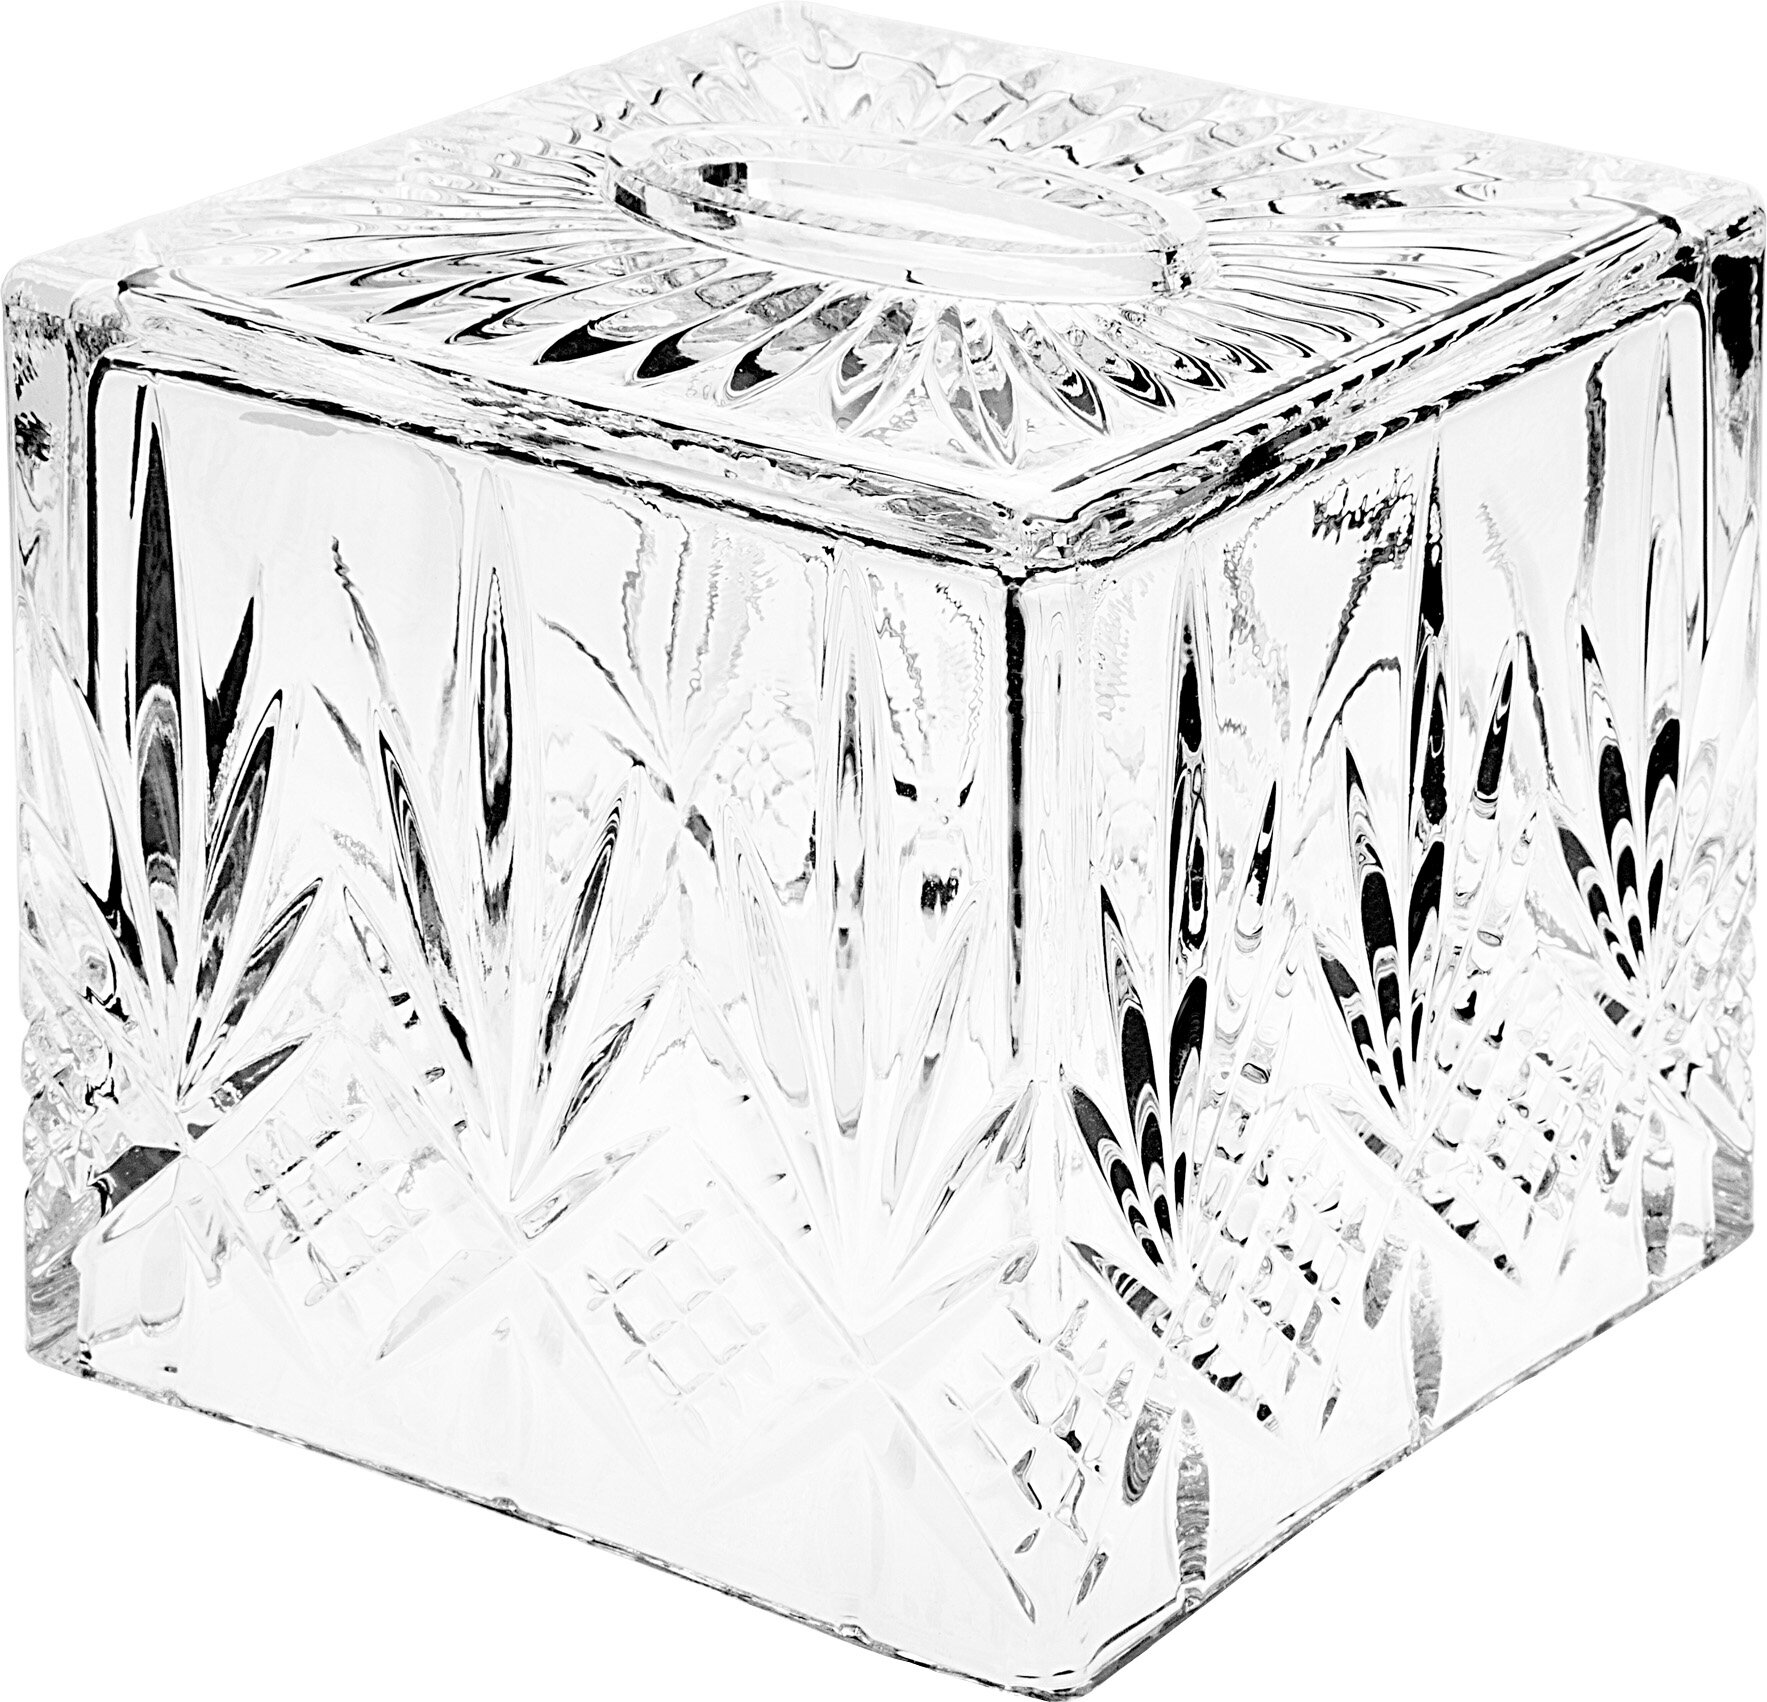 crystal tissue box cover